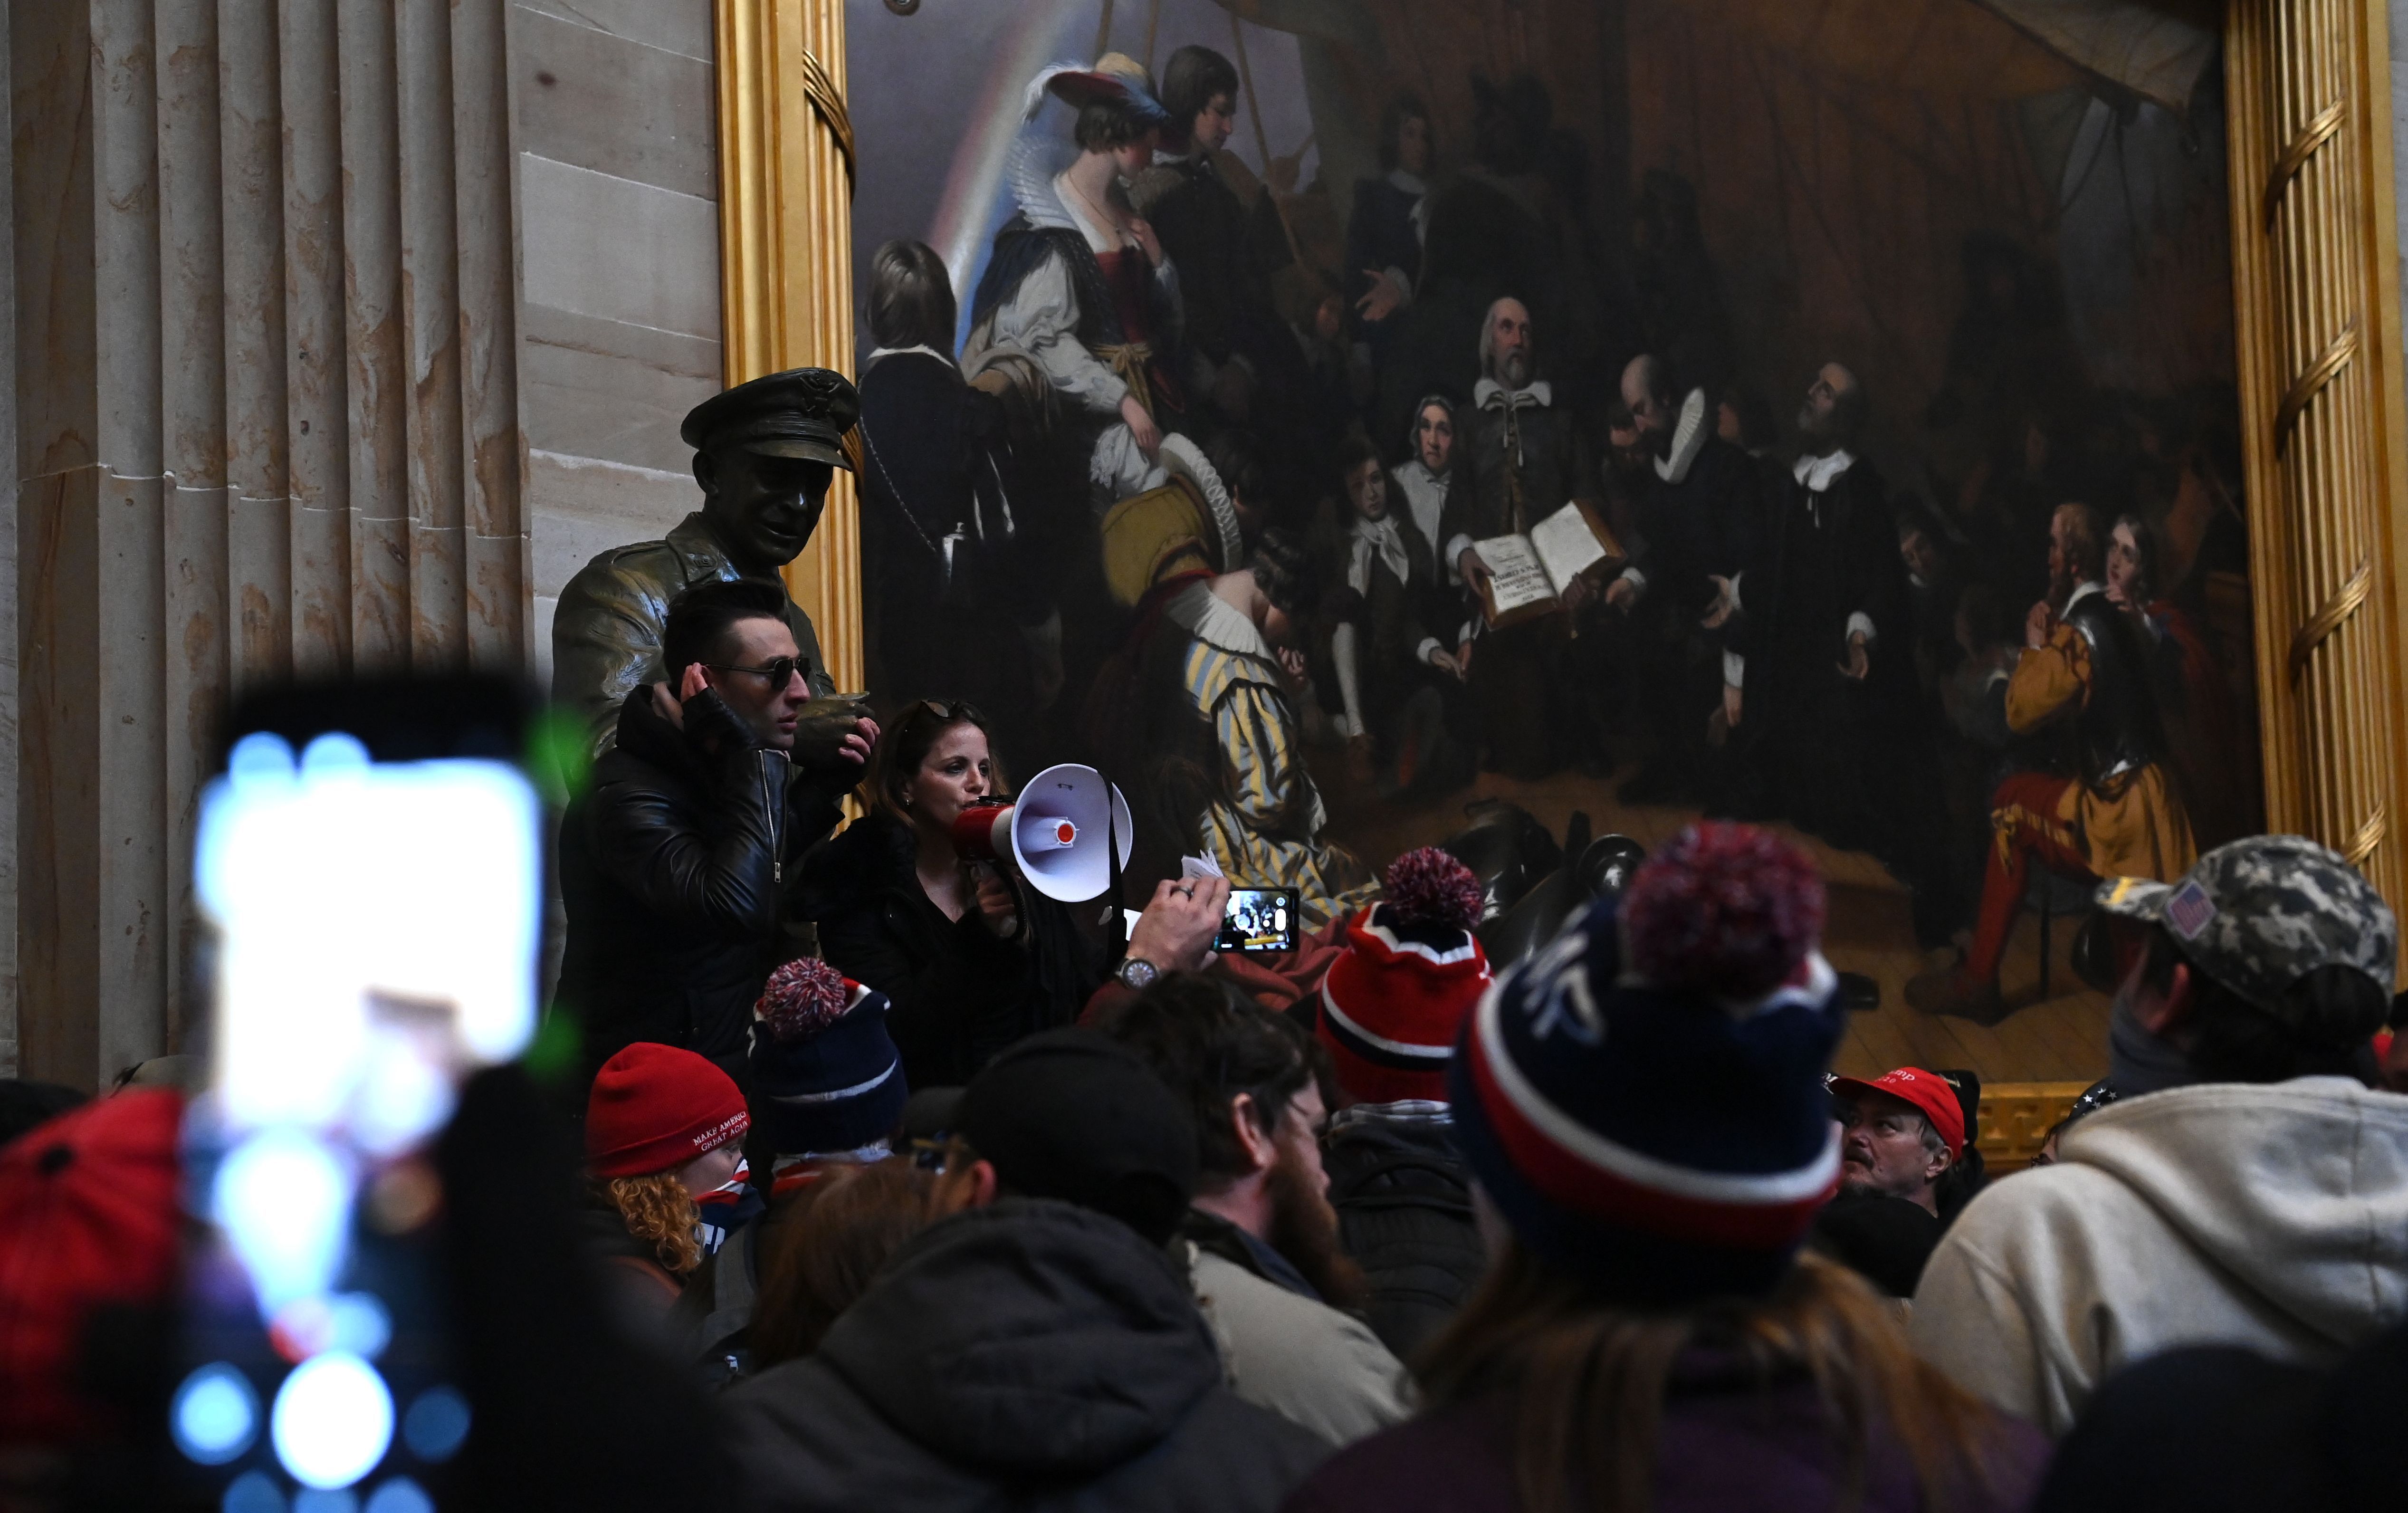 protetsors in front of a painting